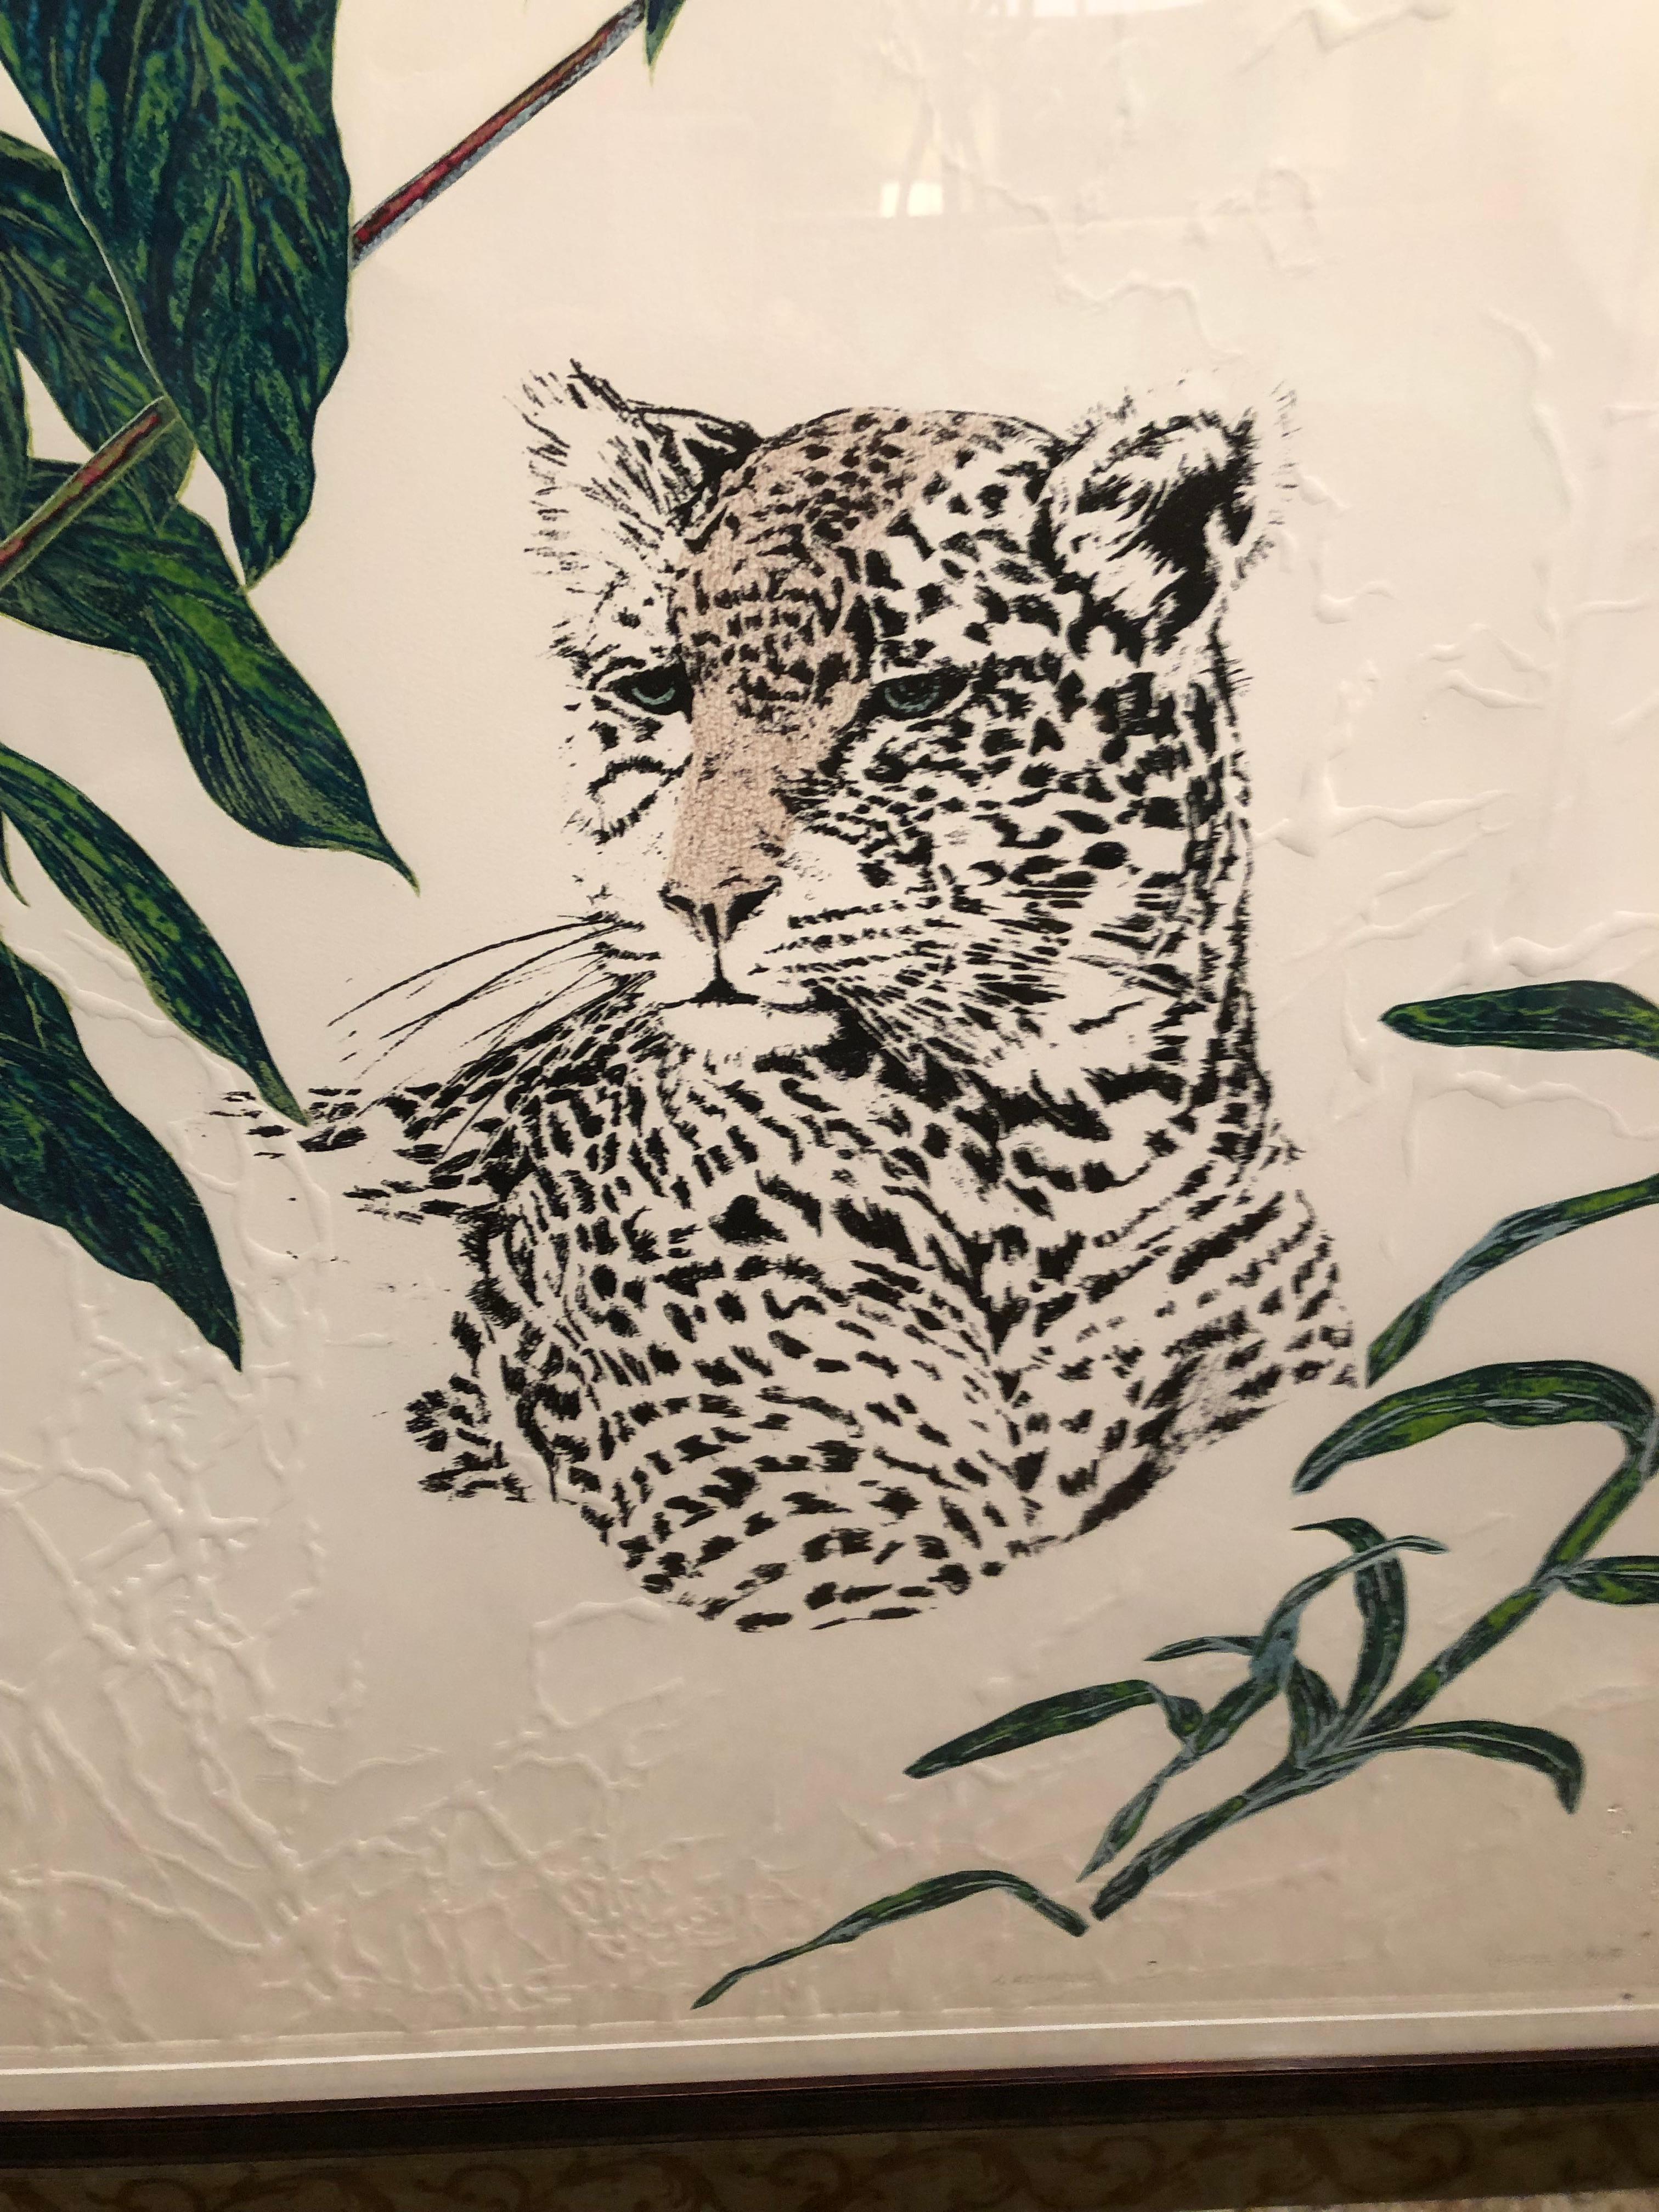 A beautiful etching by artist Jonna White having central black and white leopard among stylishly rendered tropical foliage. Paper has incredible raised embossed decoration. Custom wood frame compliments the work. Signed and numbered 47/150.